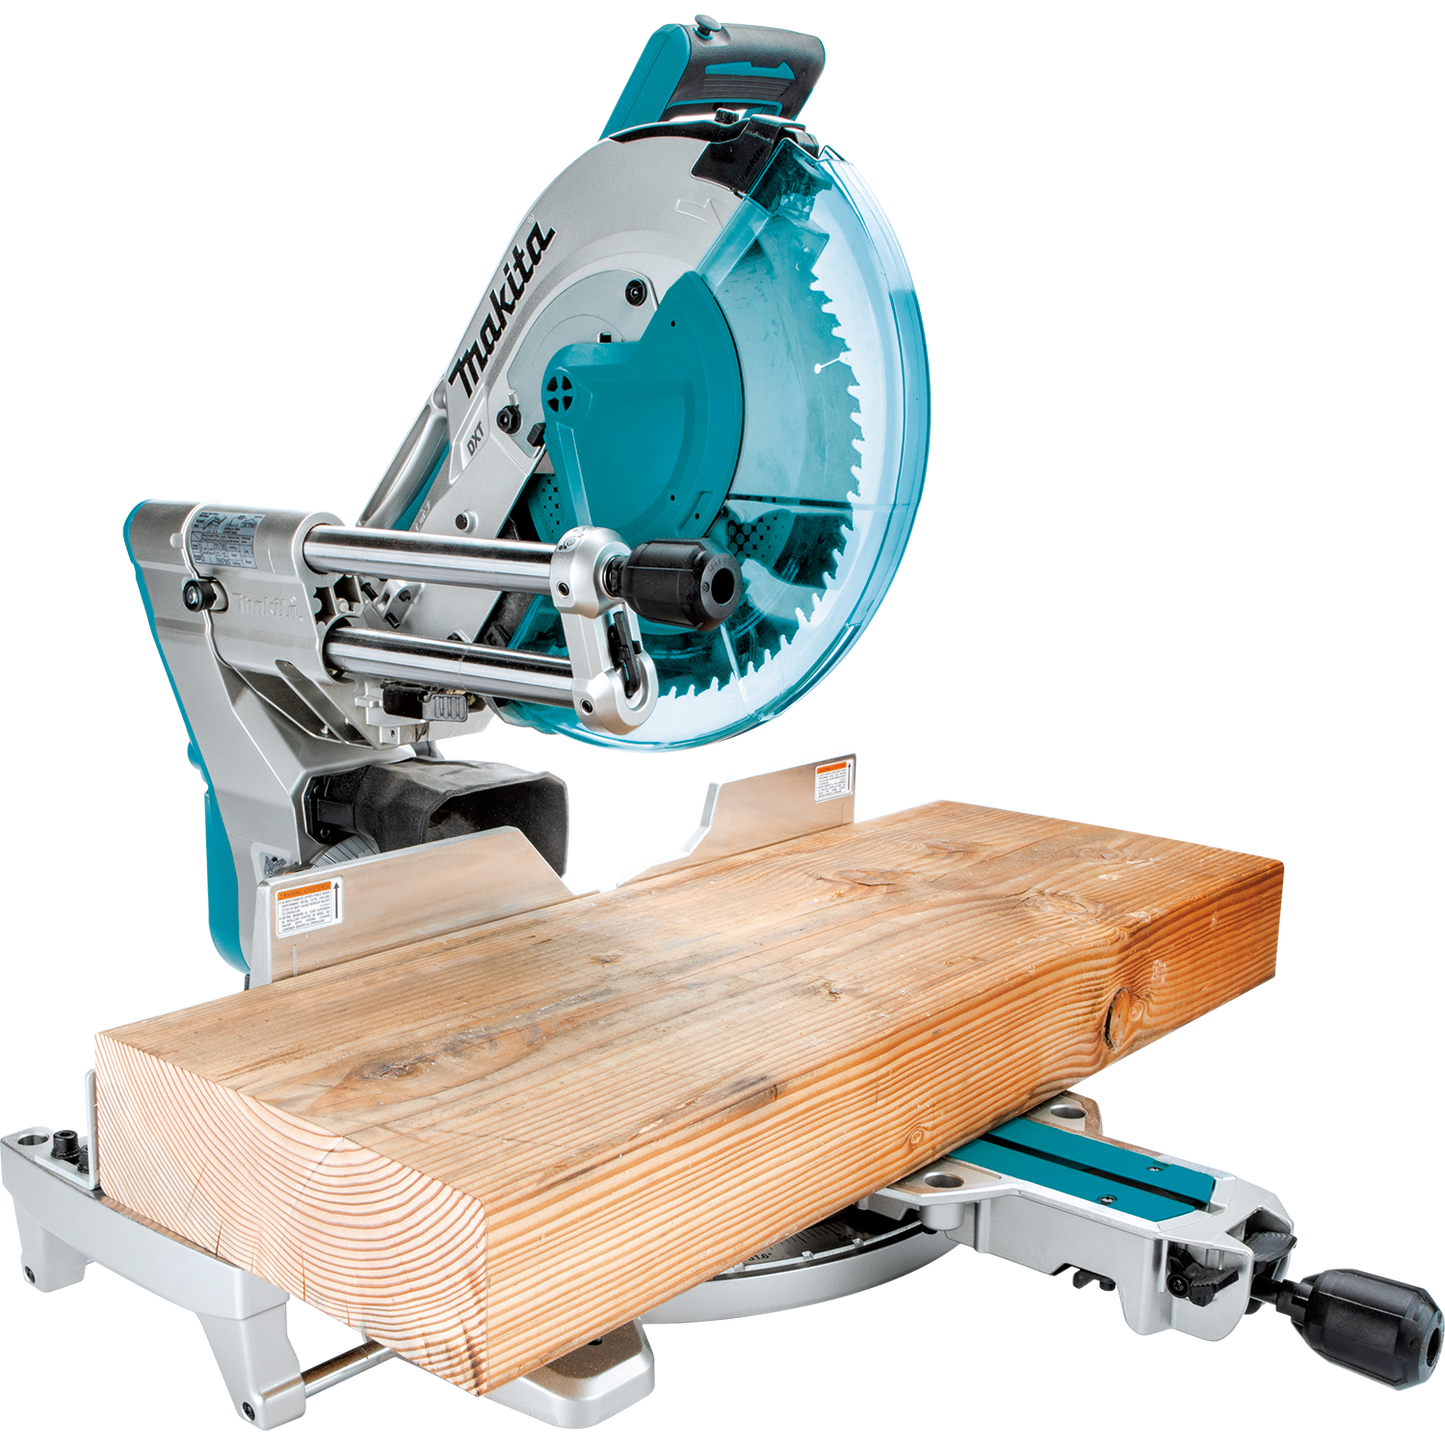 Makita 36 Volt LXT Brushless 12 Inch Dual Bevel Sliding Compound Miter Saw With Laser Factory Serviced (Tool Only)